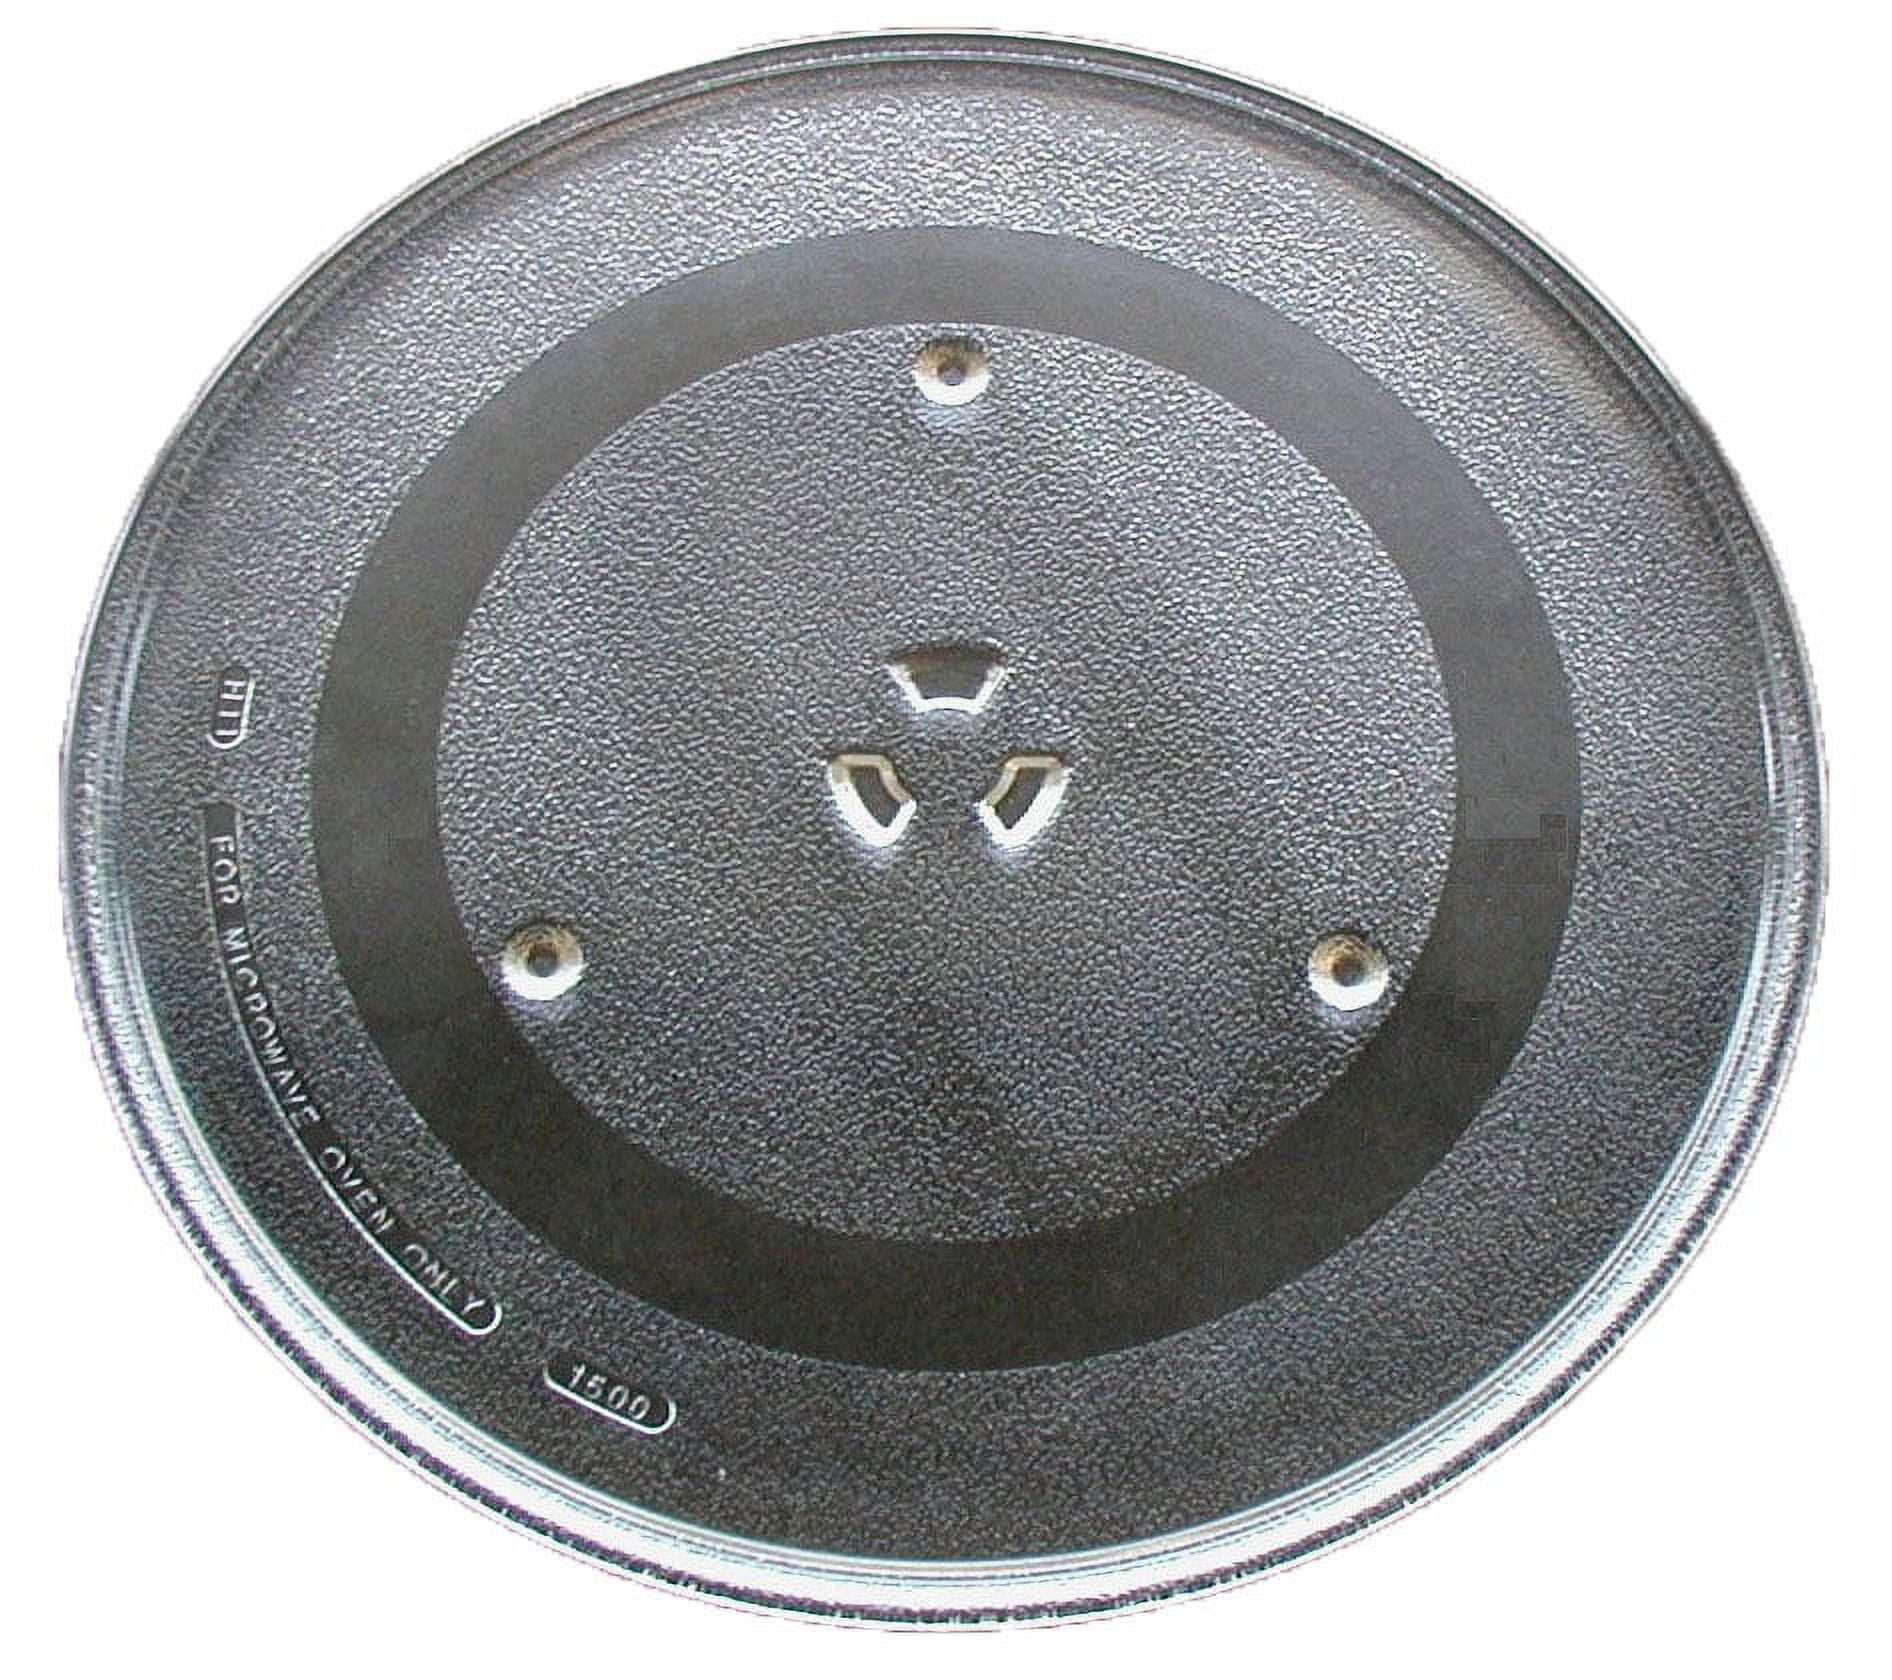 Wolf Microwave Glass Turntable Plate / Tray 16 Inches # 826315 MW24, MDD24  & MDD30 Models